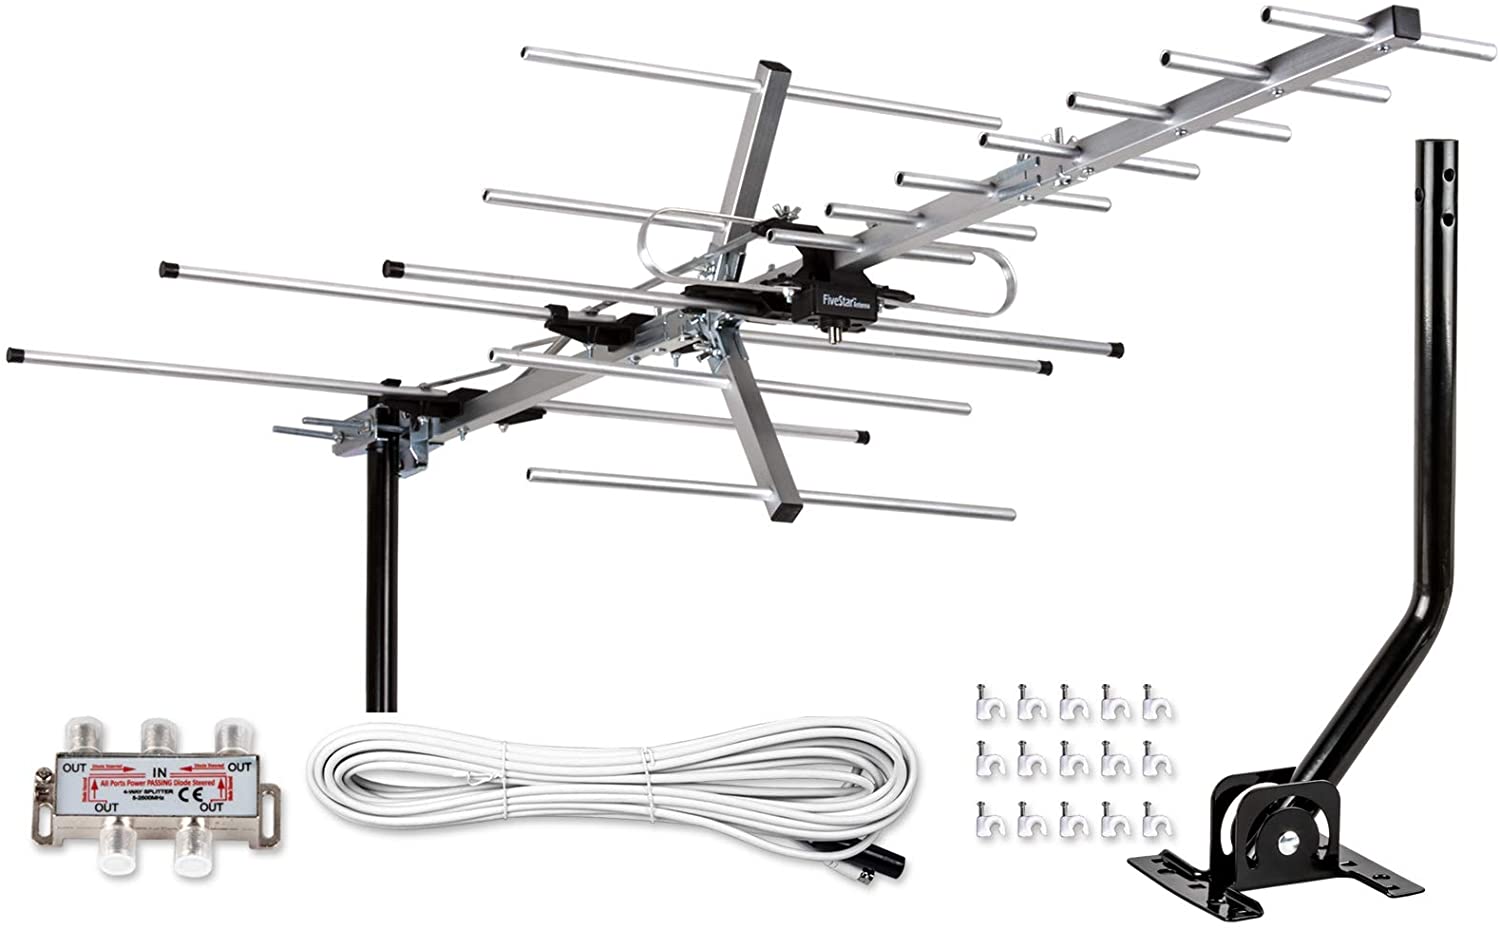 Five Star Outdoor Yagi Antenna 200 Mile Range VHF/UHF Channels with Installation Kit and J Pole - image 1 of 6